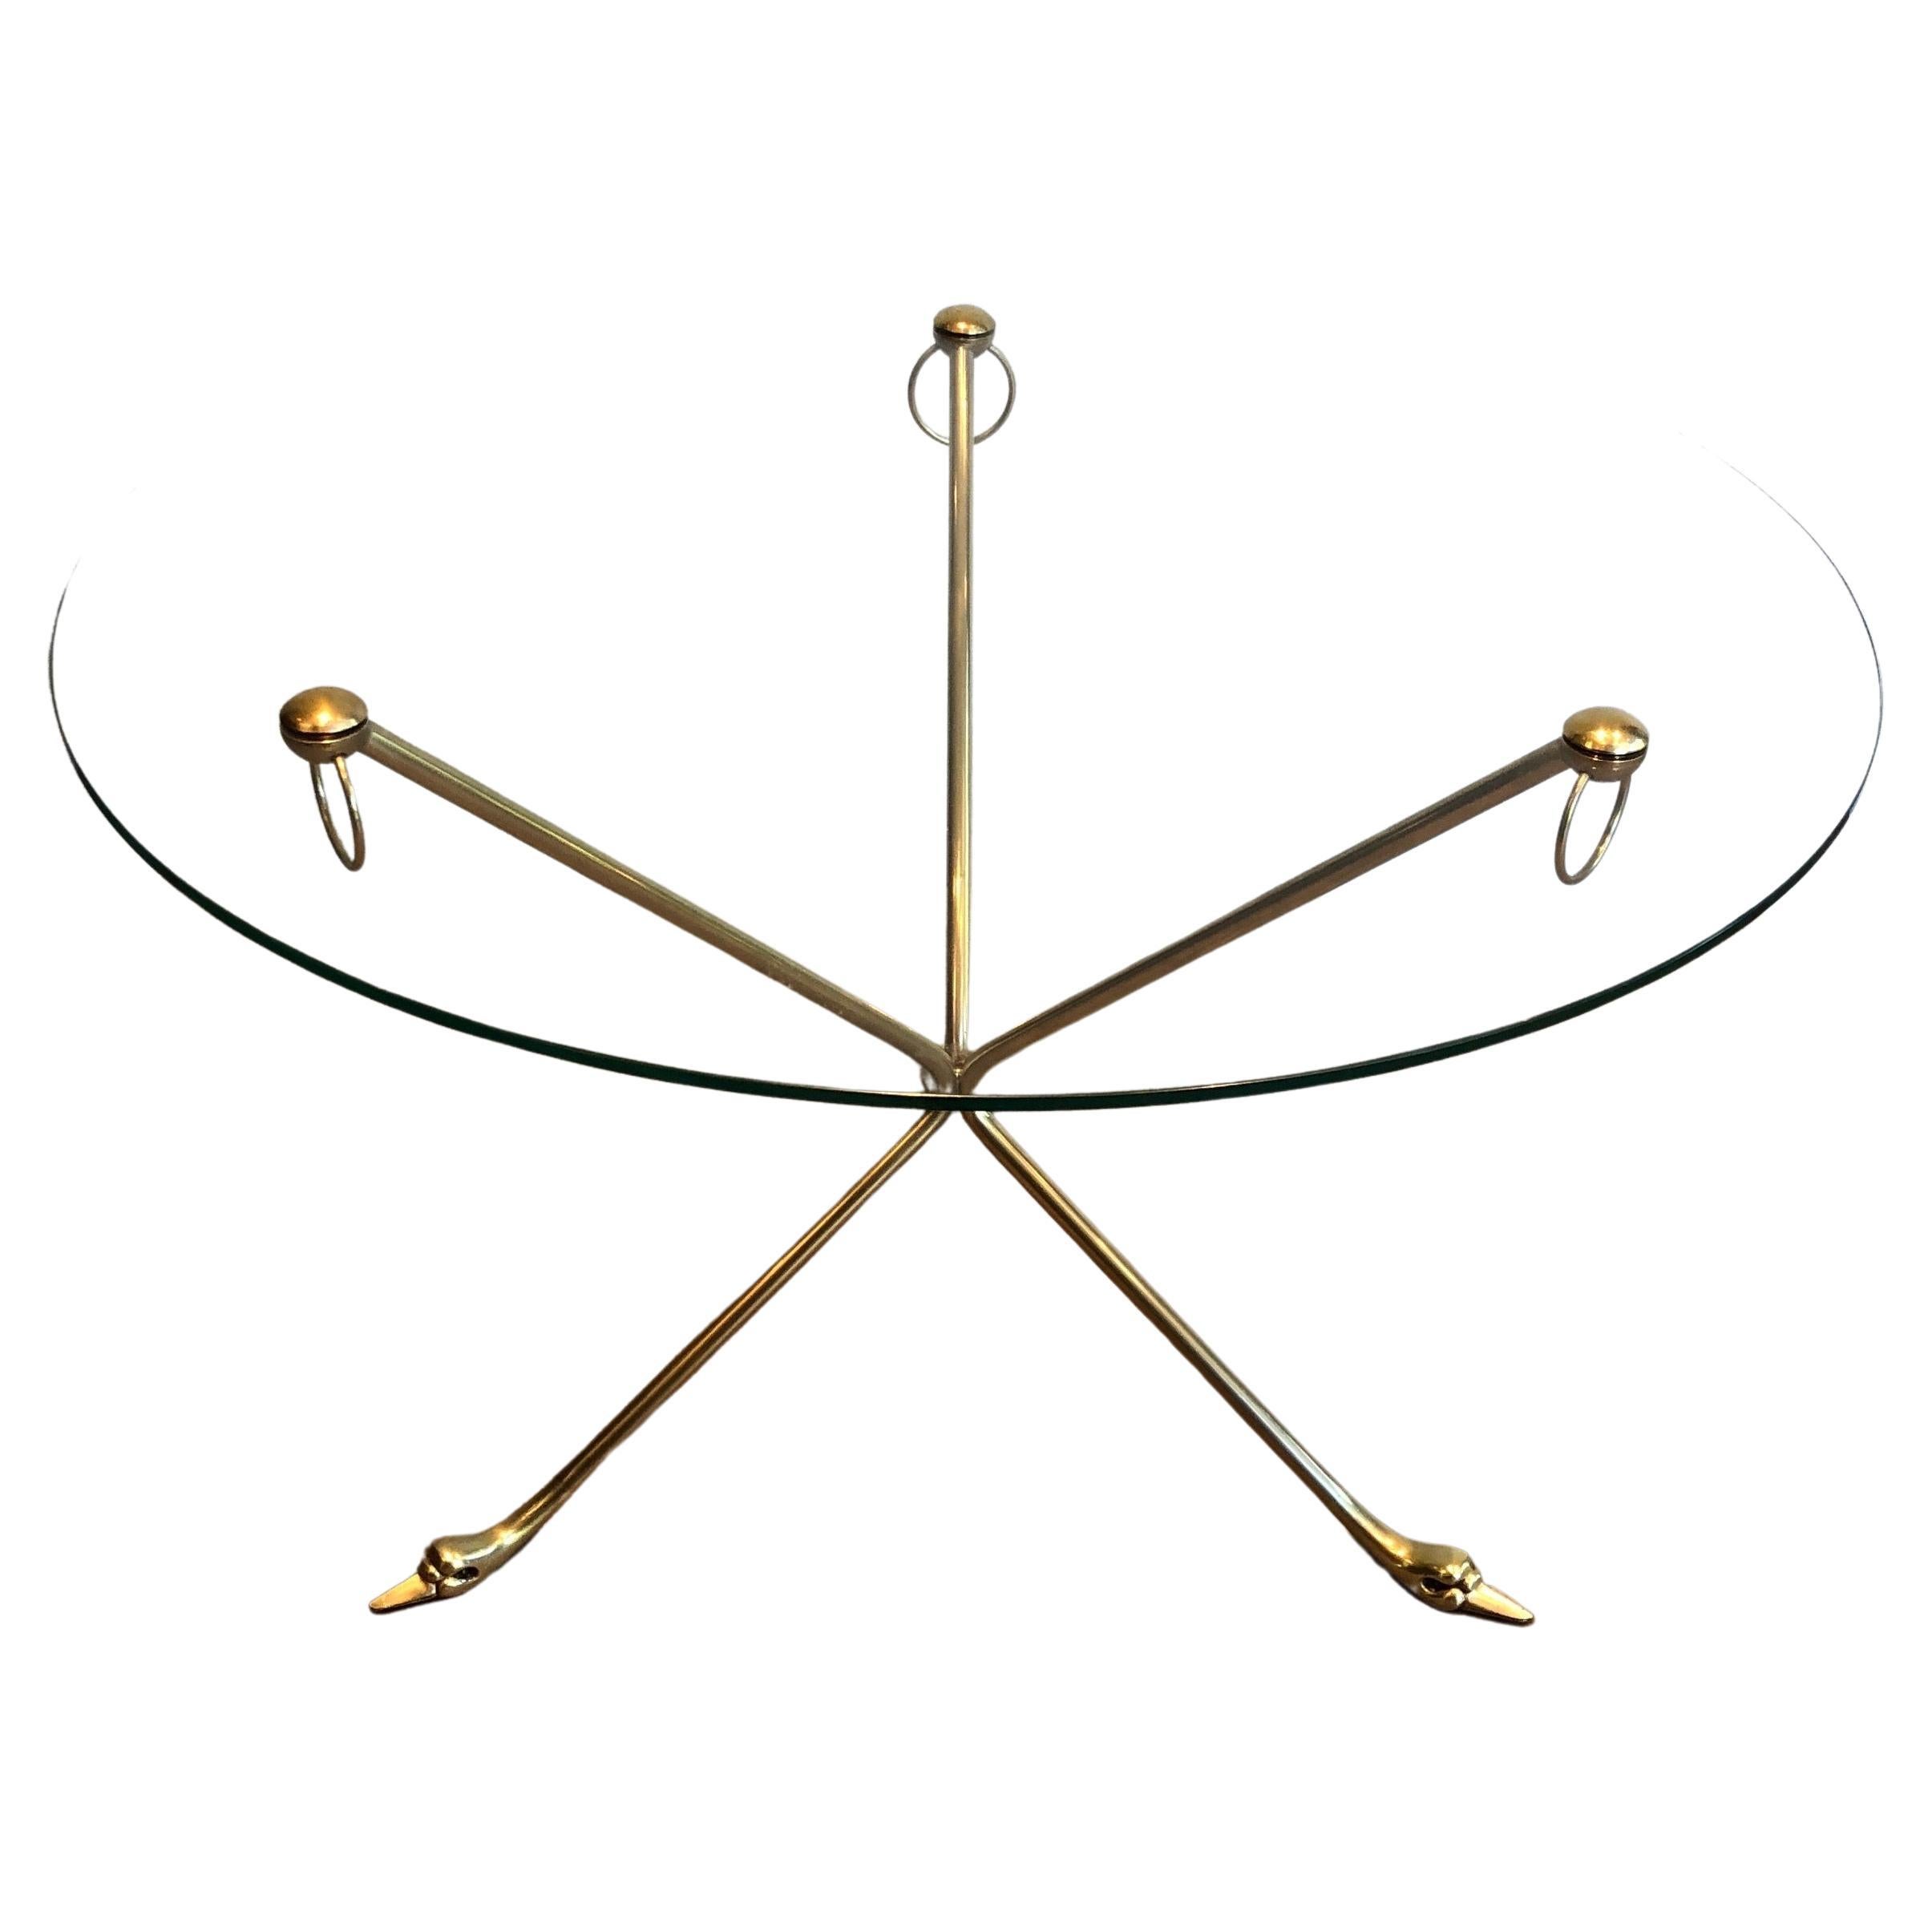 This very nice tripode swans coffee table is made of brass with a round glass top. This a work by famous french designer Maison Jansen. Circa 1940.